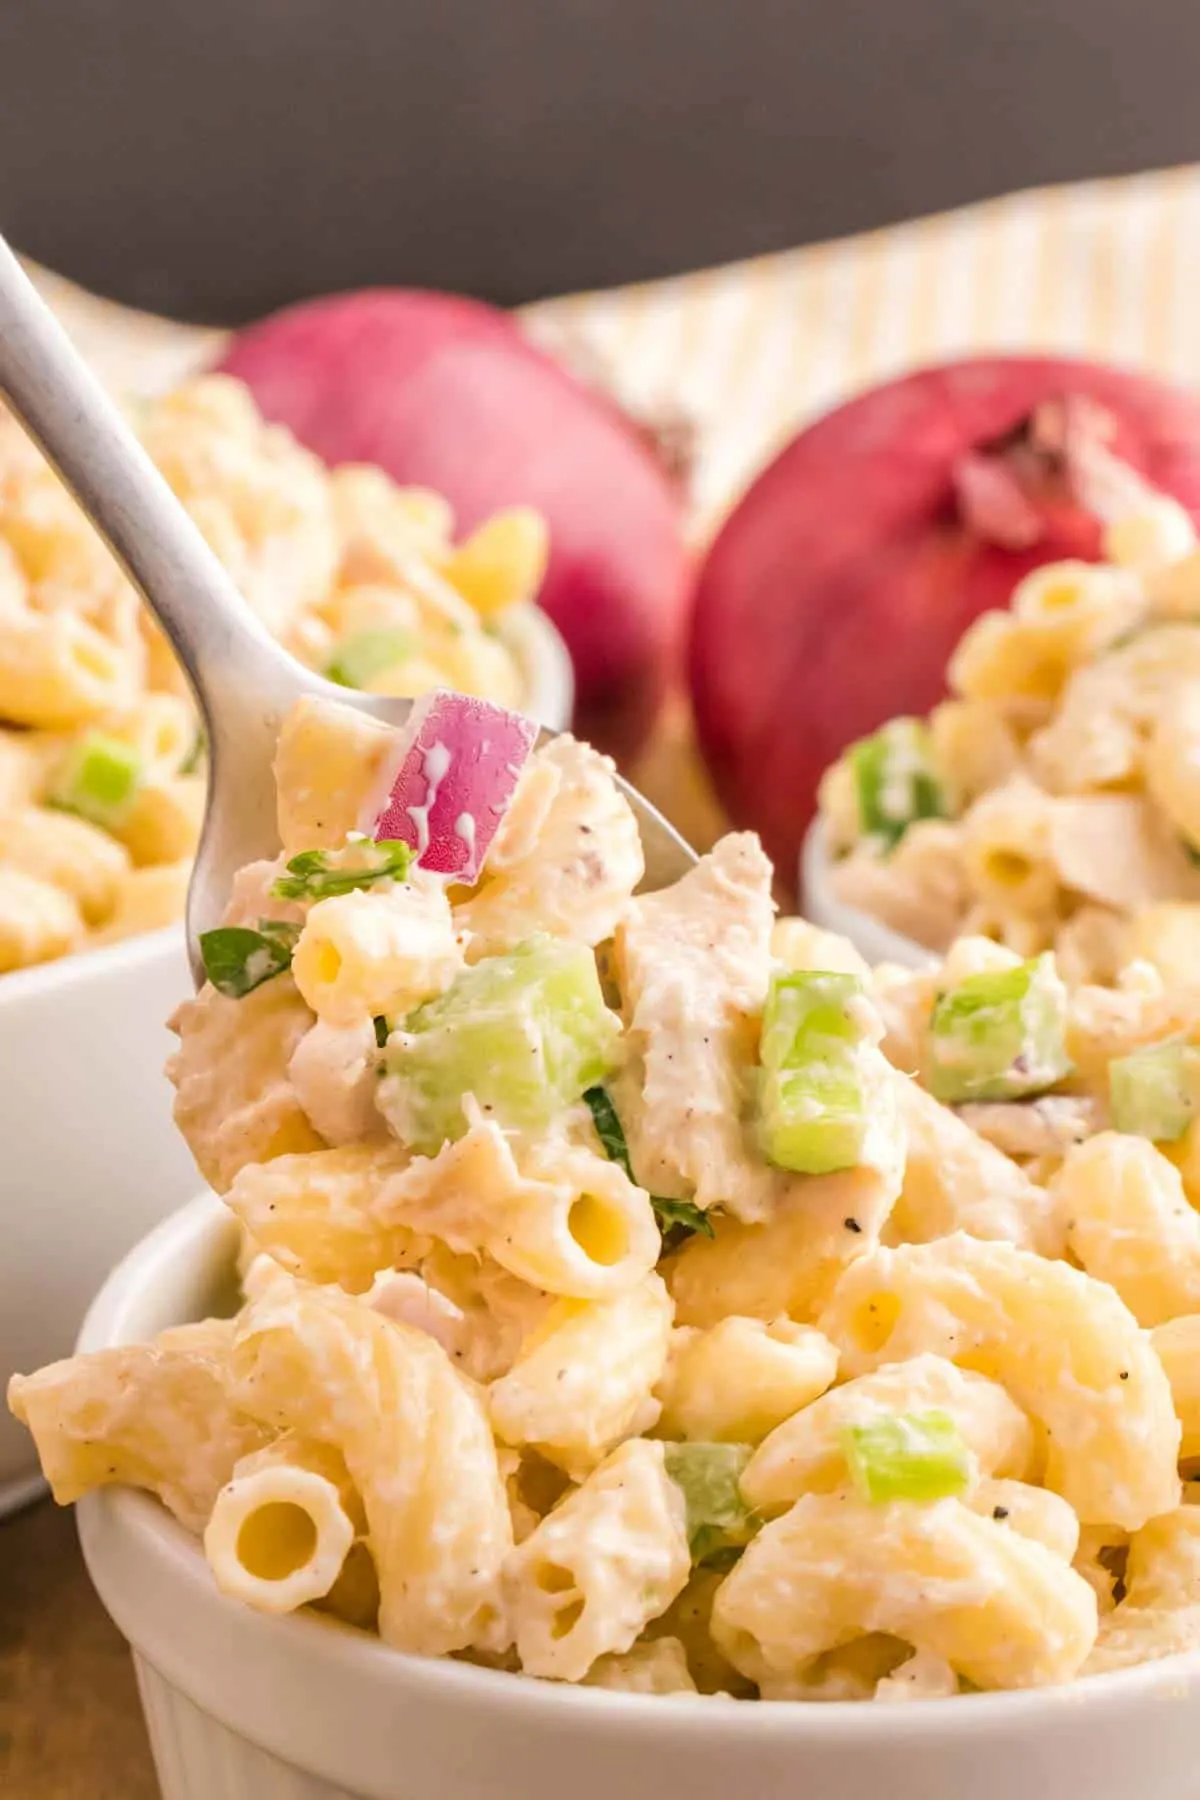 Tuna Macaroni Salad is a classic pasta salad recipe loaded with canned tuna, chopped celery, diced red onions and green peppers all tossed in a seasoned mayo dressing.